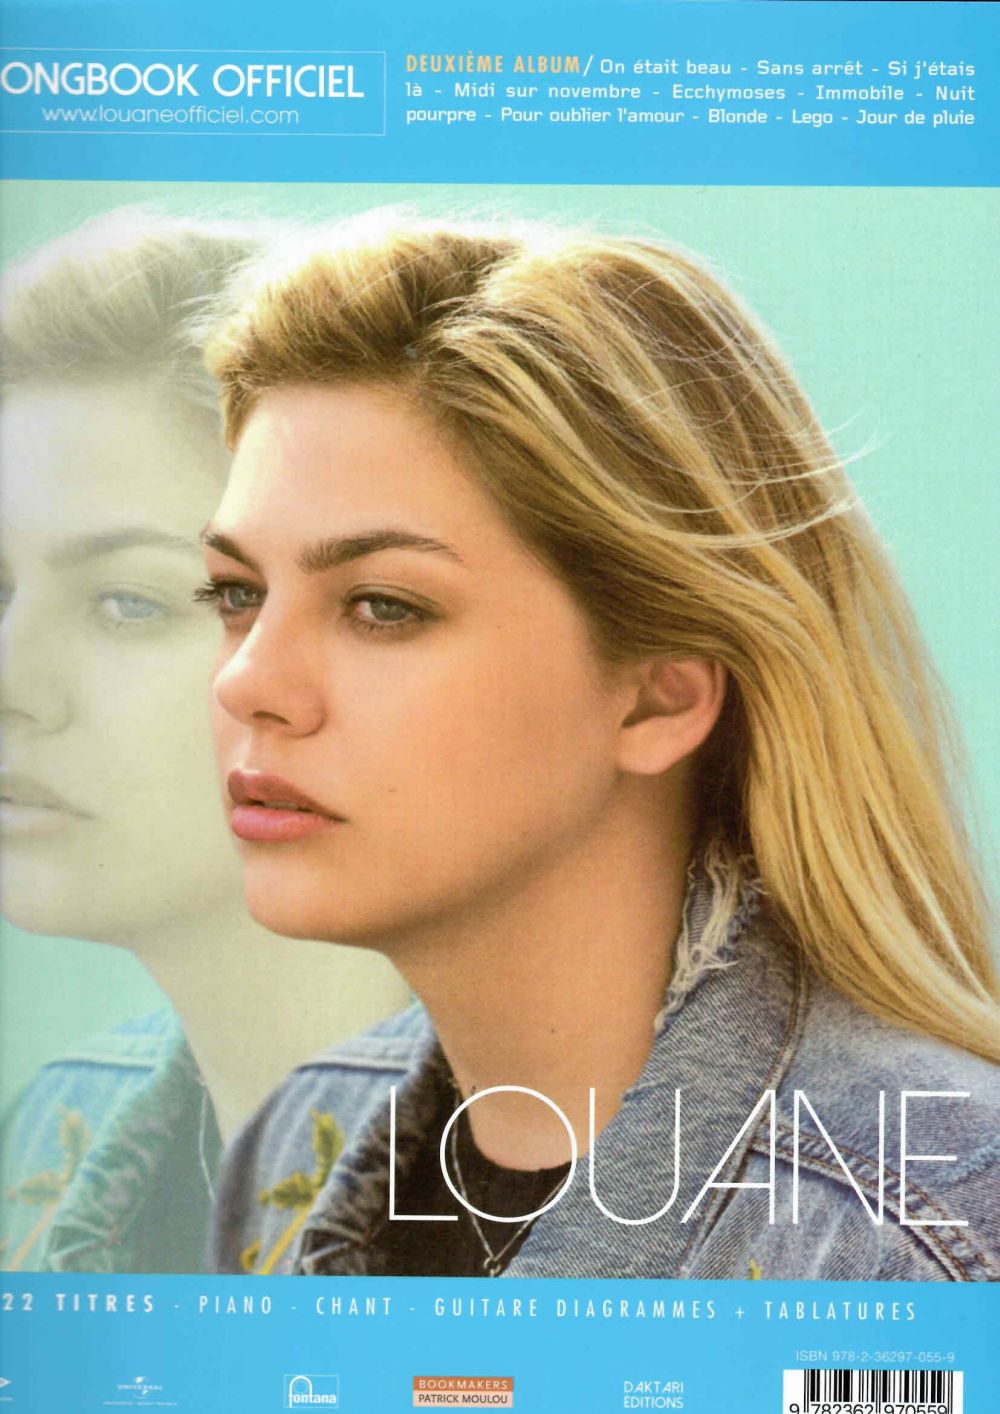 BOOKMAKERS INTERNATIONAL LOUANE - CHAMBRE 12 / LOUANE - LE SONGBOOK OFFICIEL (2 ALBUMS) - PVG